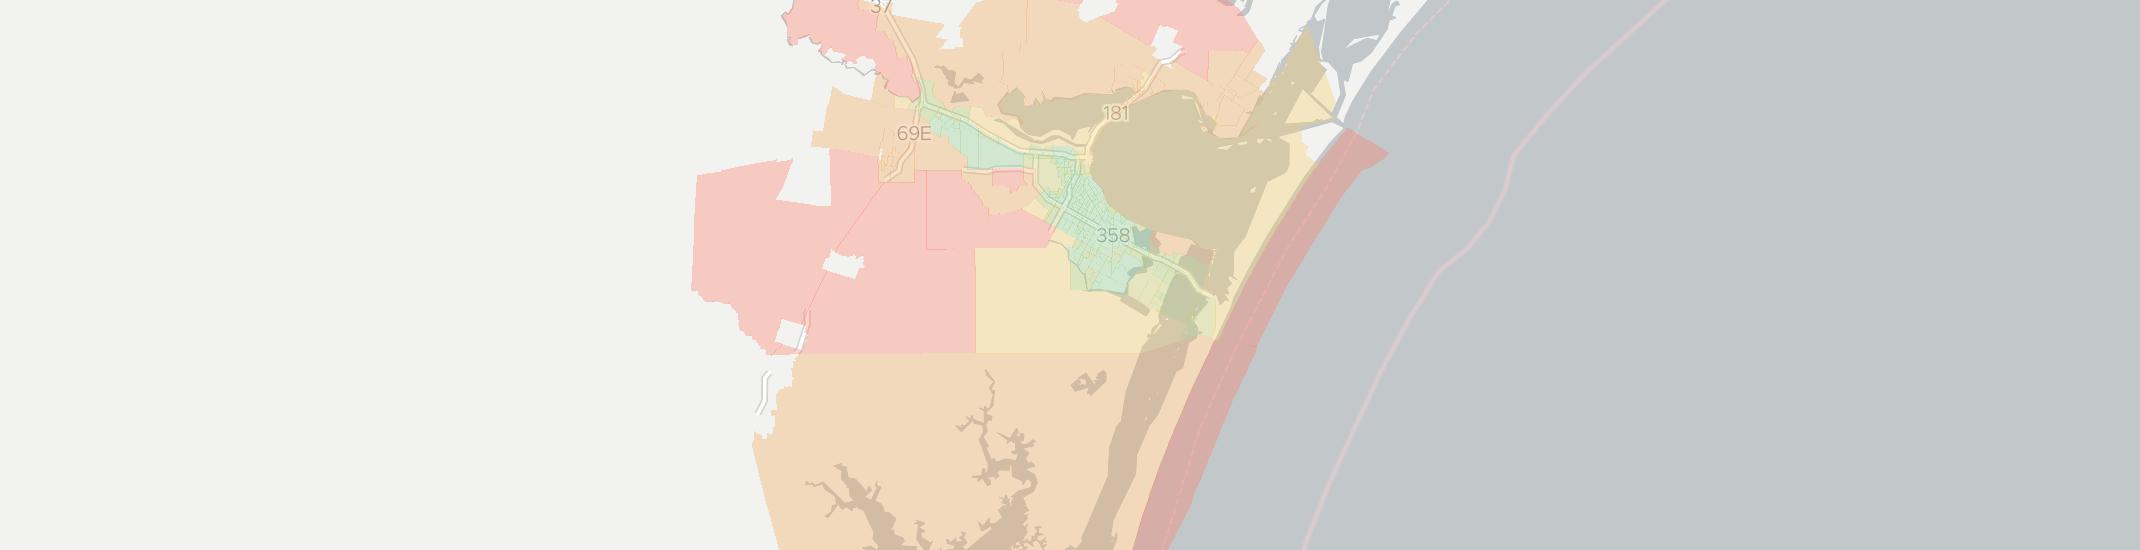 Corpus Christi Internet Competition Map. Click for interactive map.